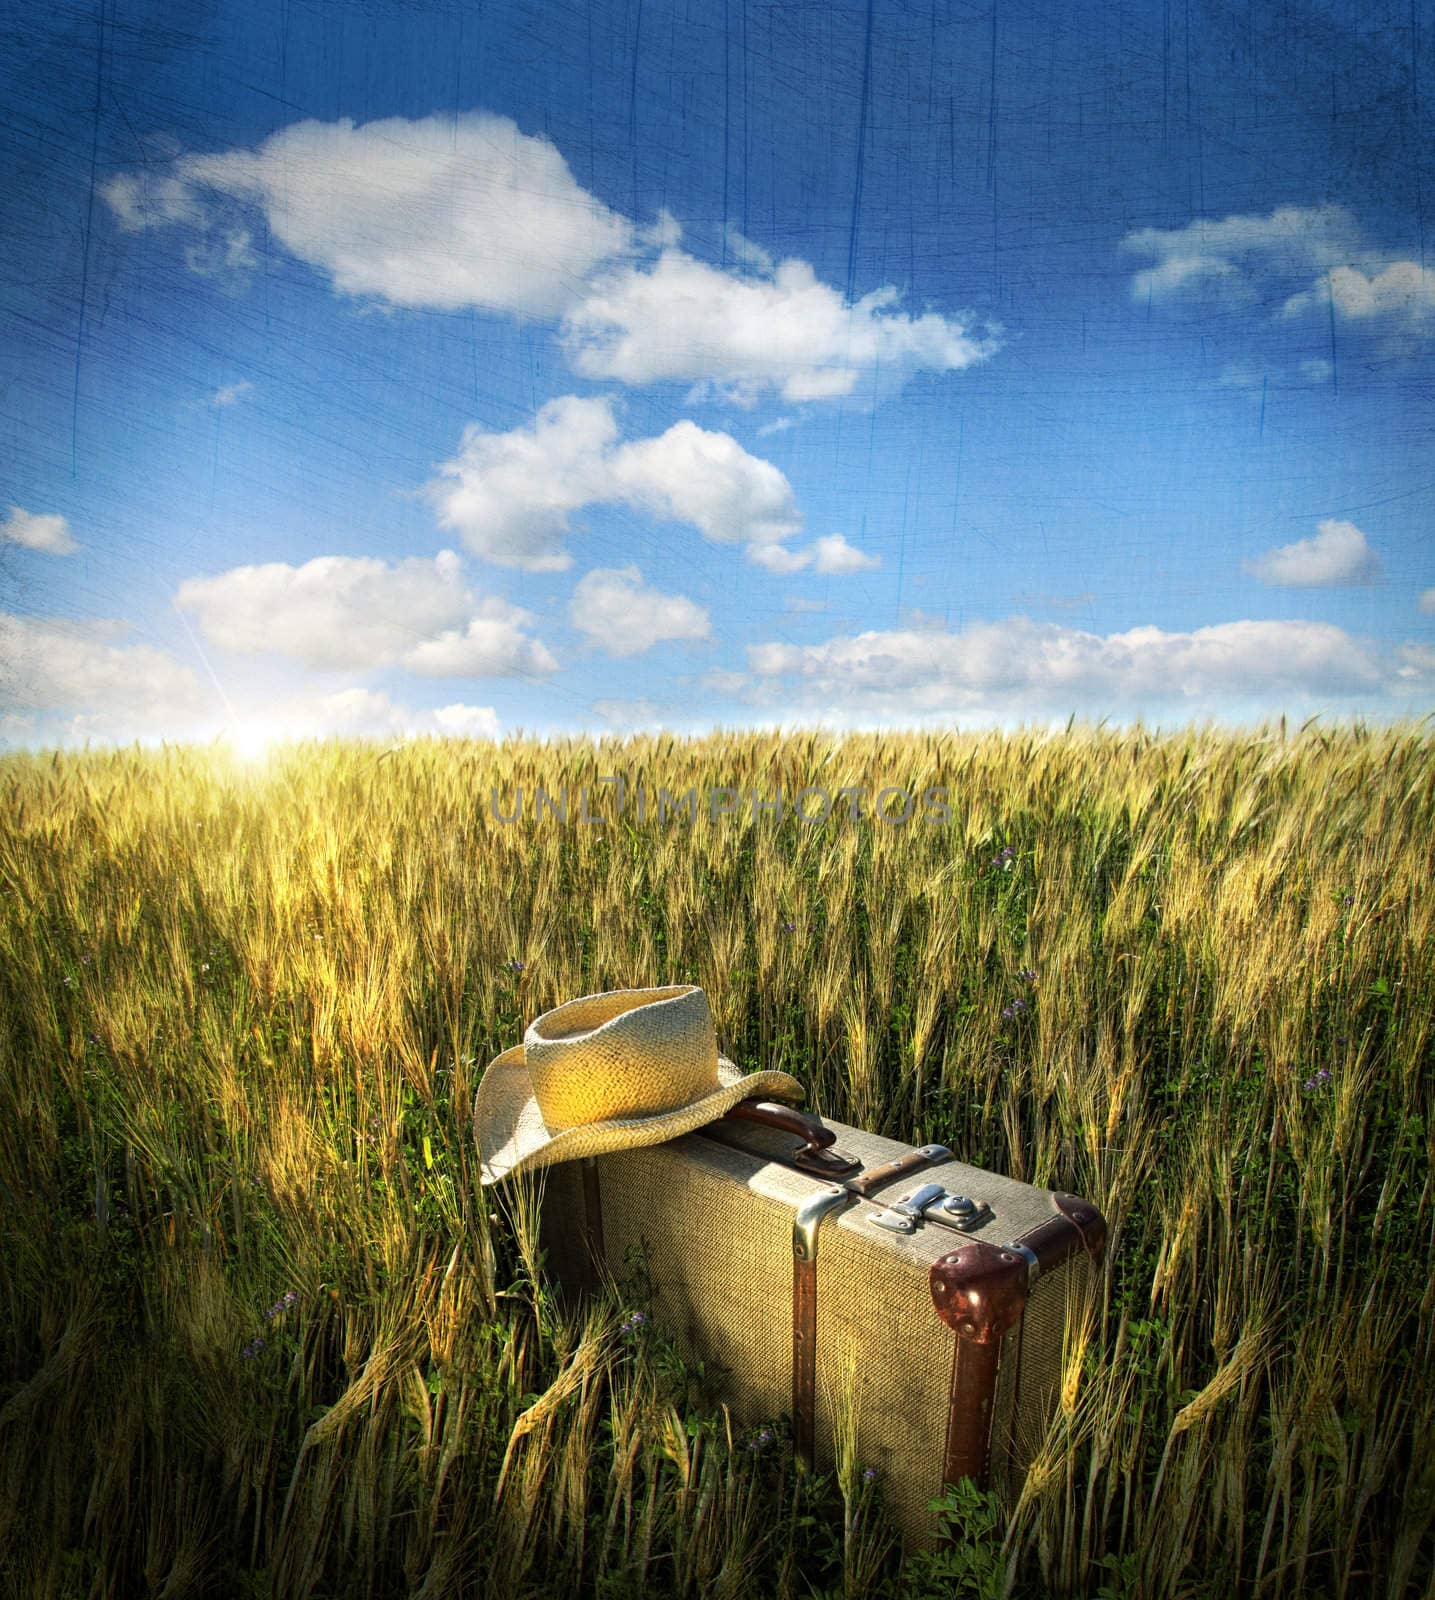 Old suitcase with straw hat in field by Sandralise